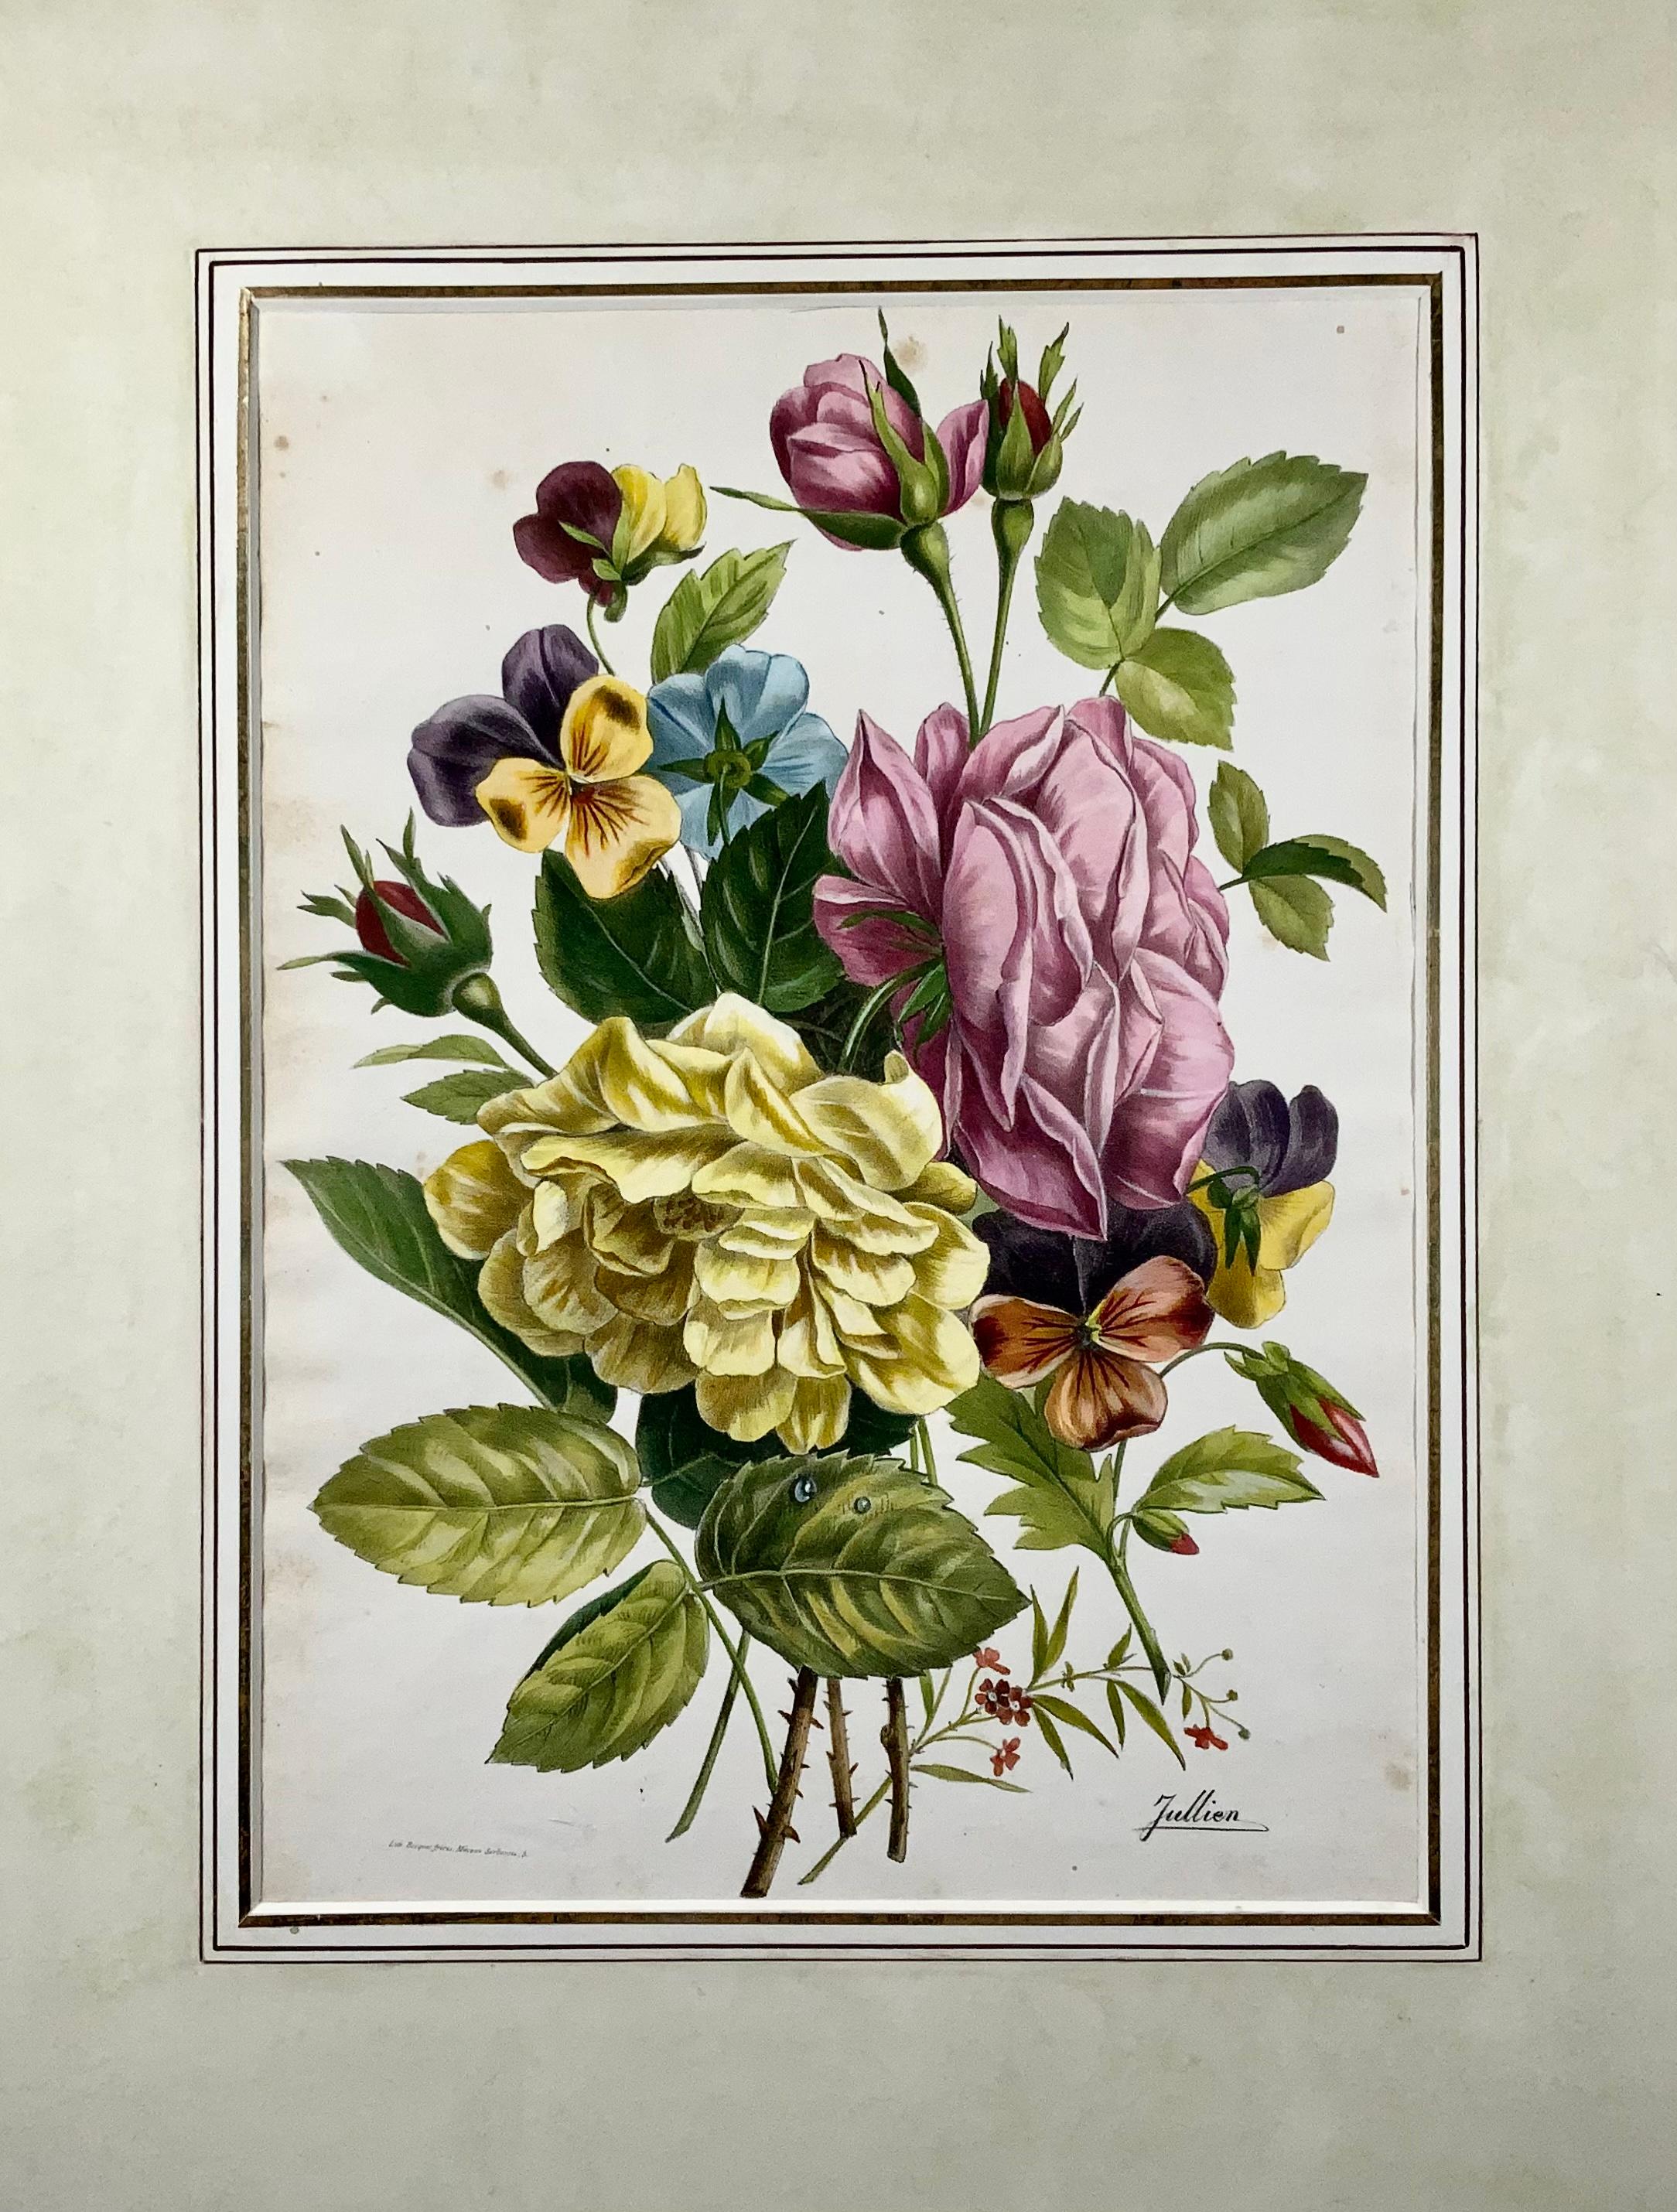 Signed Jullien (in the stone)

Stone lithograph by Becquet, Macons Sorbonne 5, Paris

Sheet without mount 29.7 x 21.2 cm

Extremely rare stone lithograph bouquet with exquisite original hand colour.

Mounted.

Very light marginal age spotting.